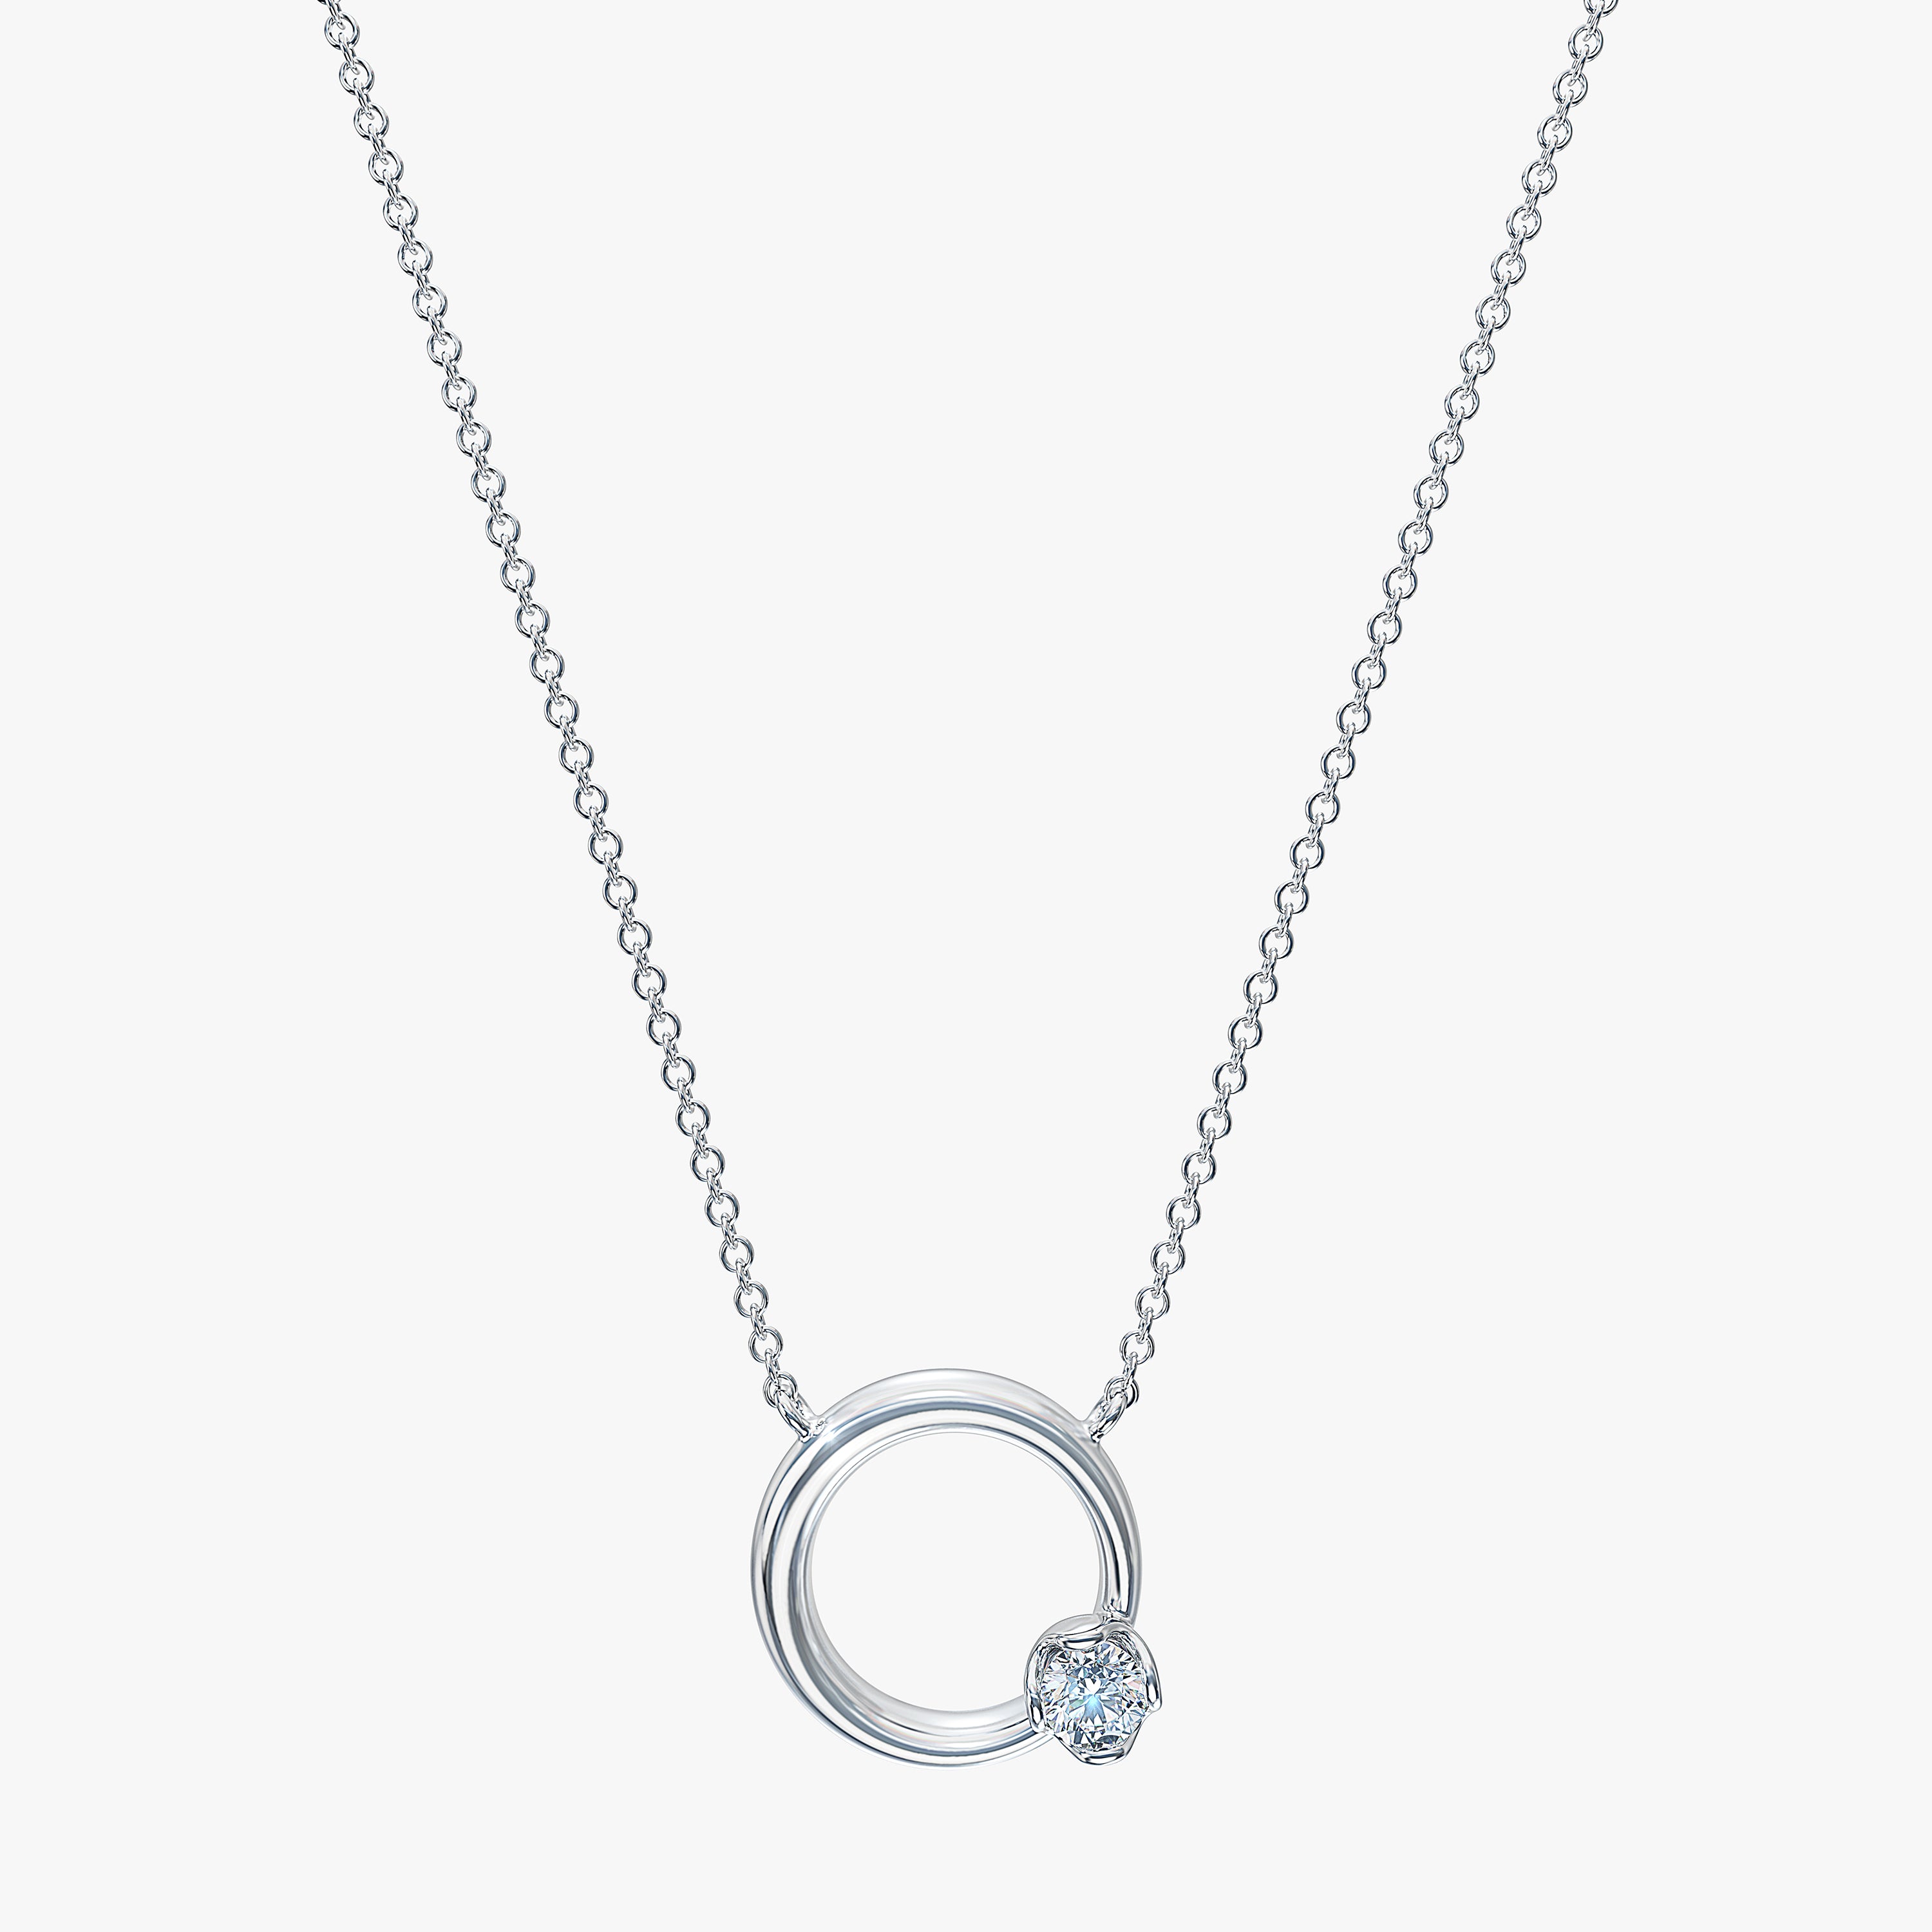 Pendant and Silver Chain for Women| Silver Jewellery by Silver Linings –  Silverlinings